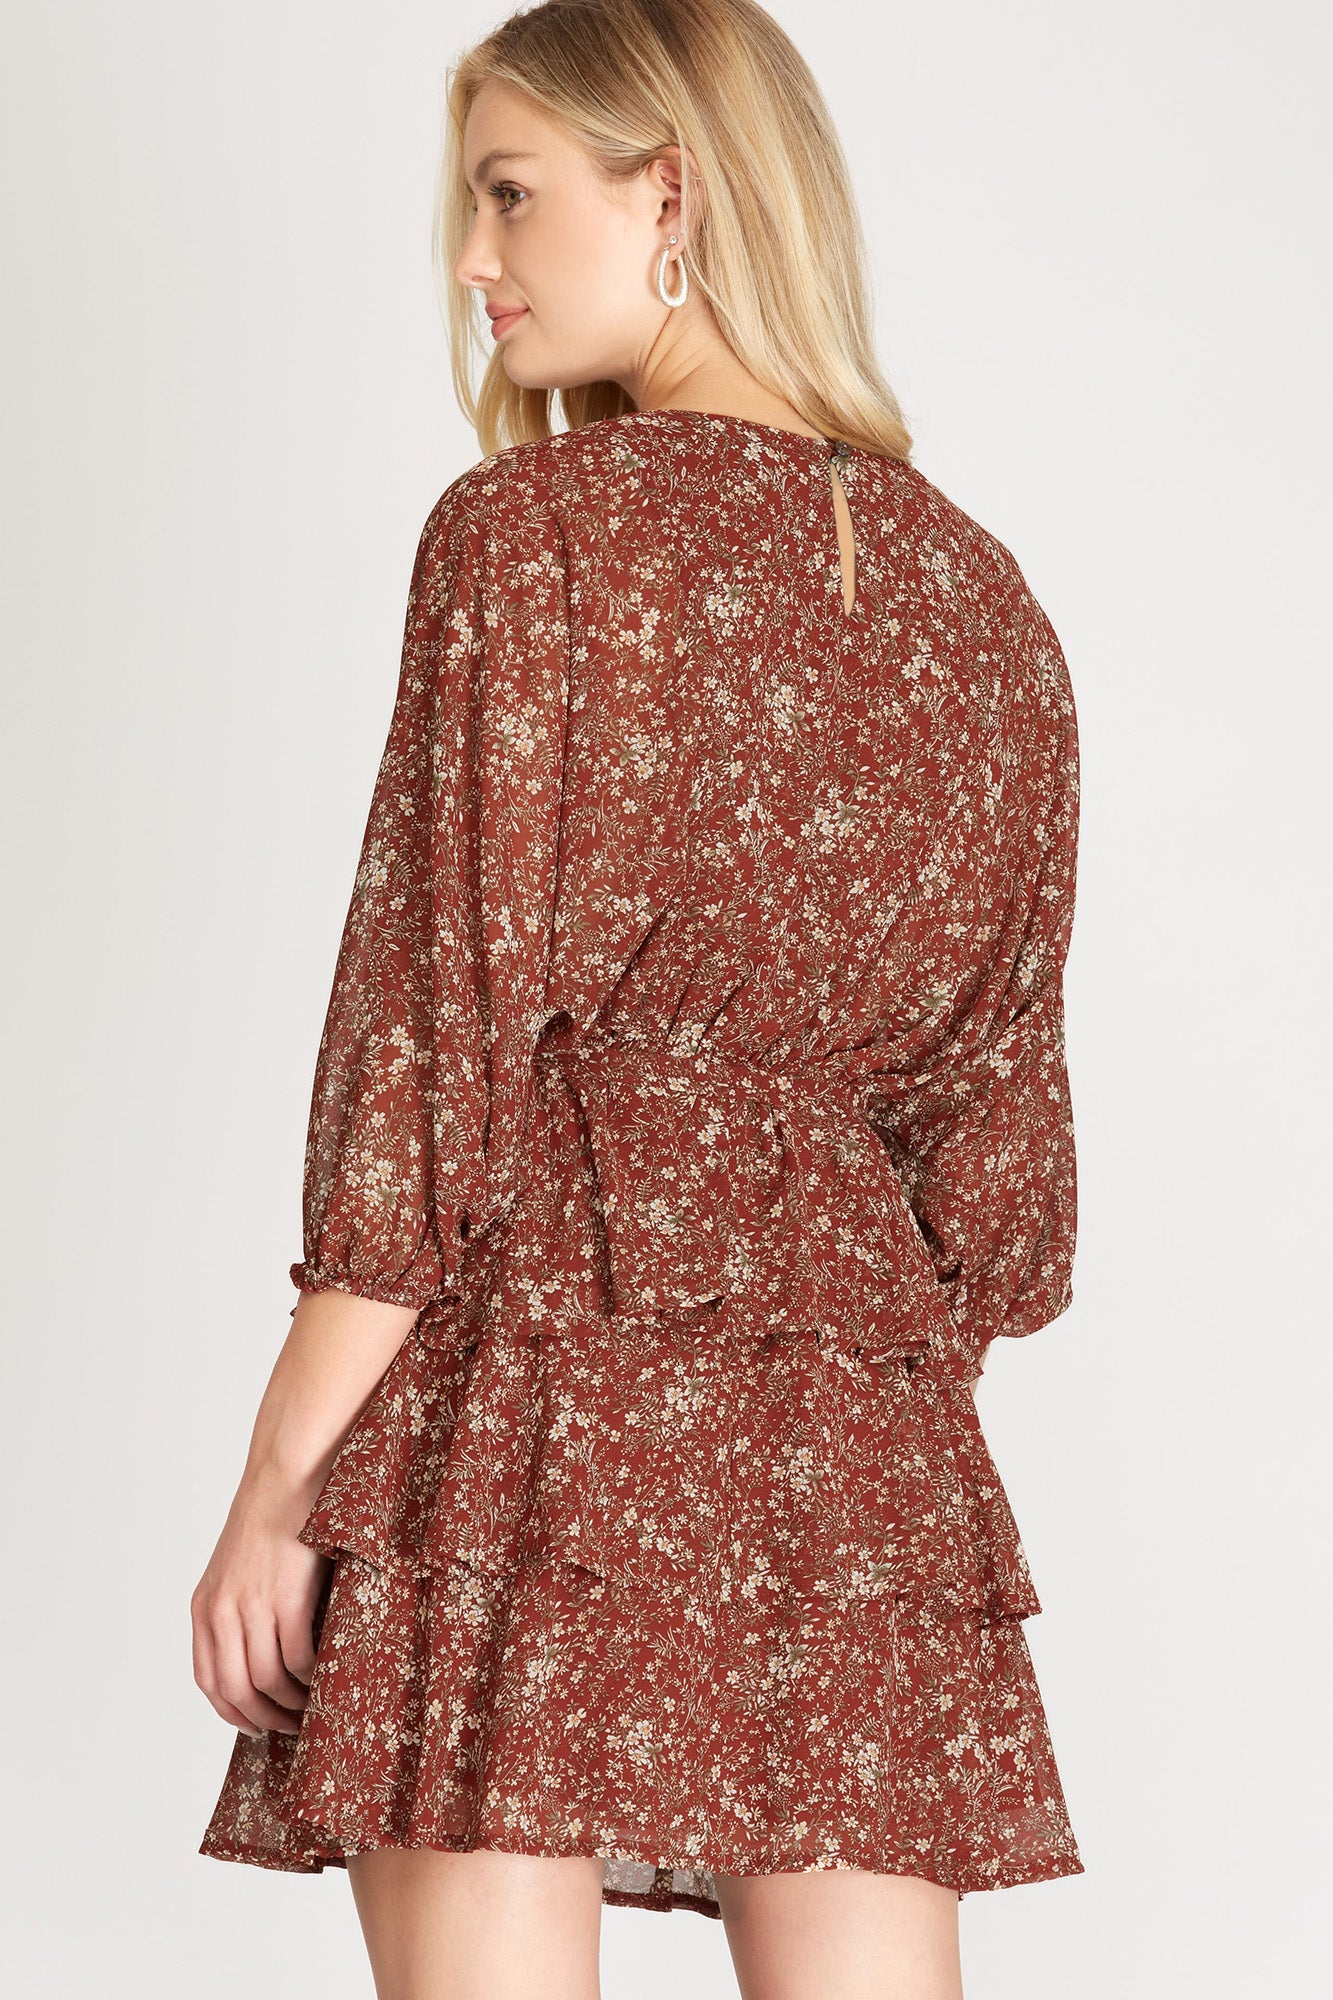 Floral Tiered Ruffle Dress in Burgundy